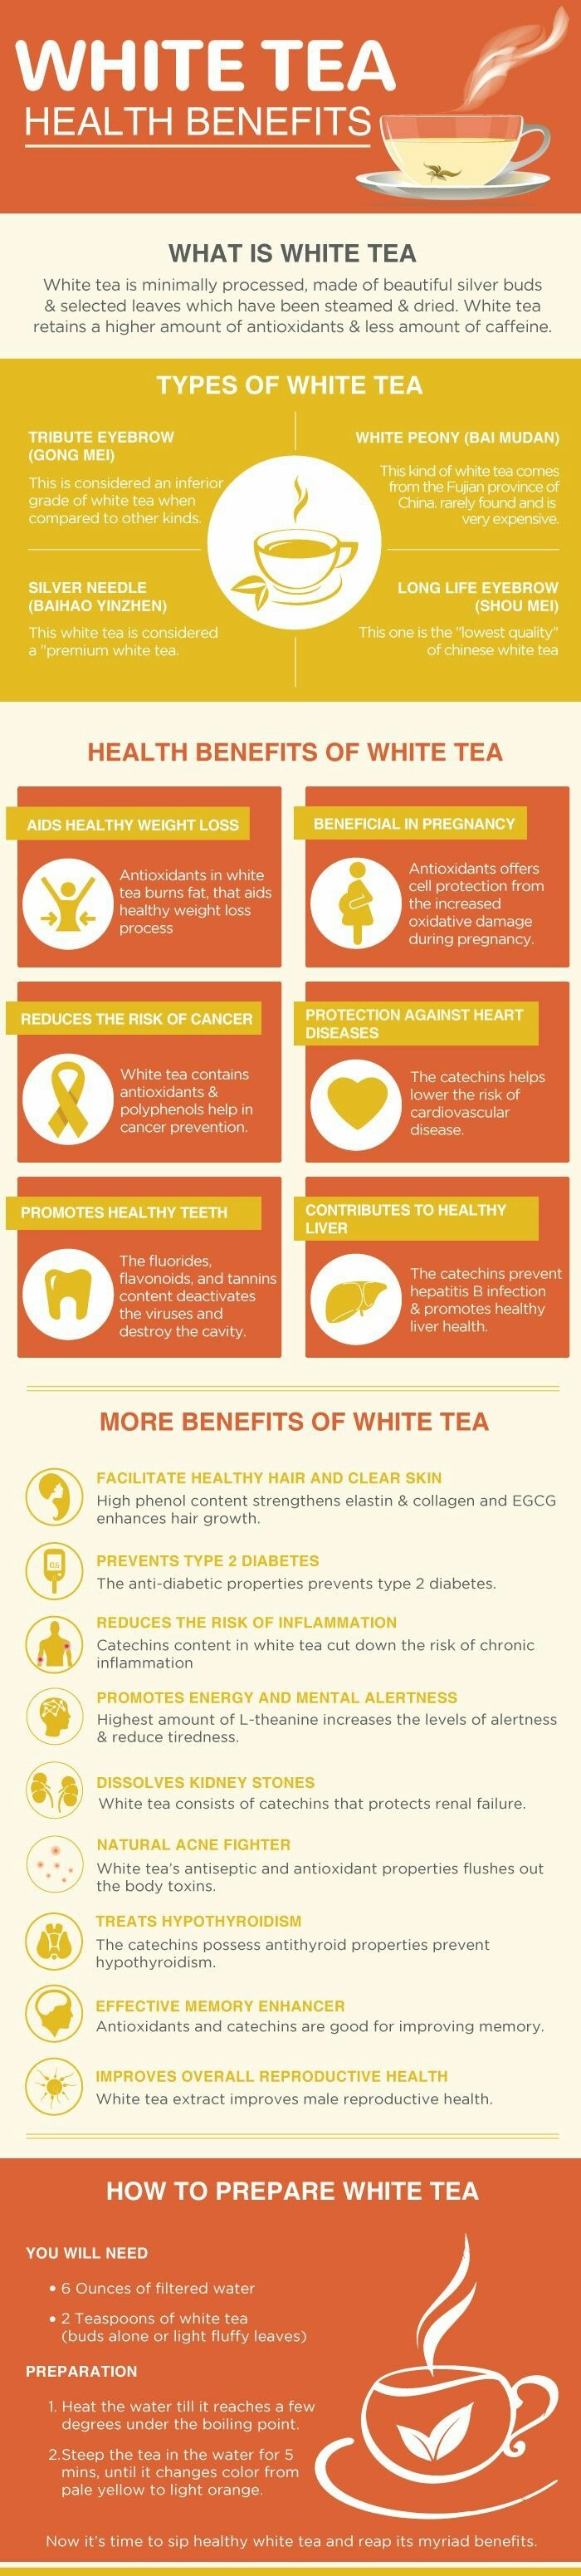 Worth a try - The benefits of white tea. Sounds like a winner. 